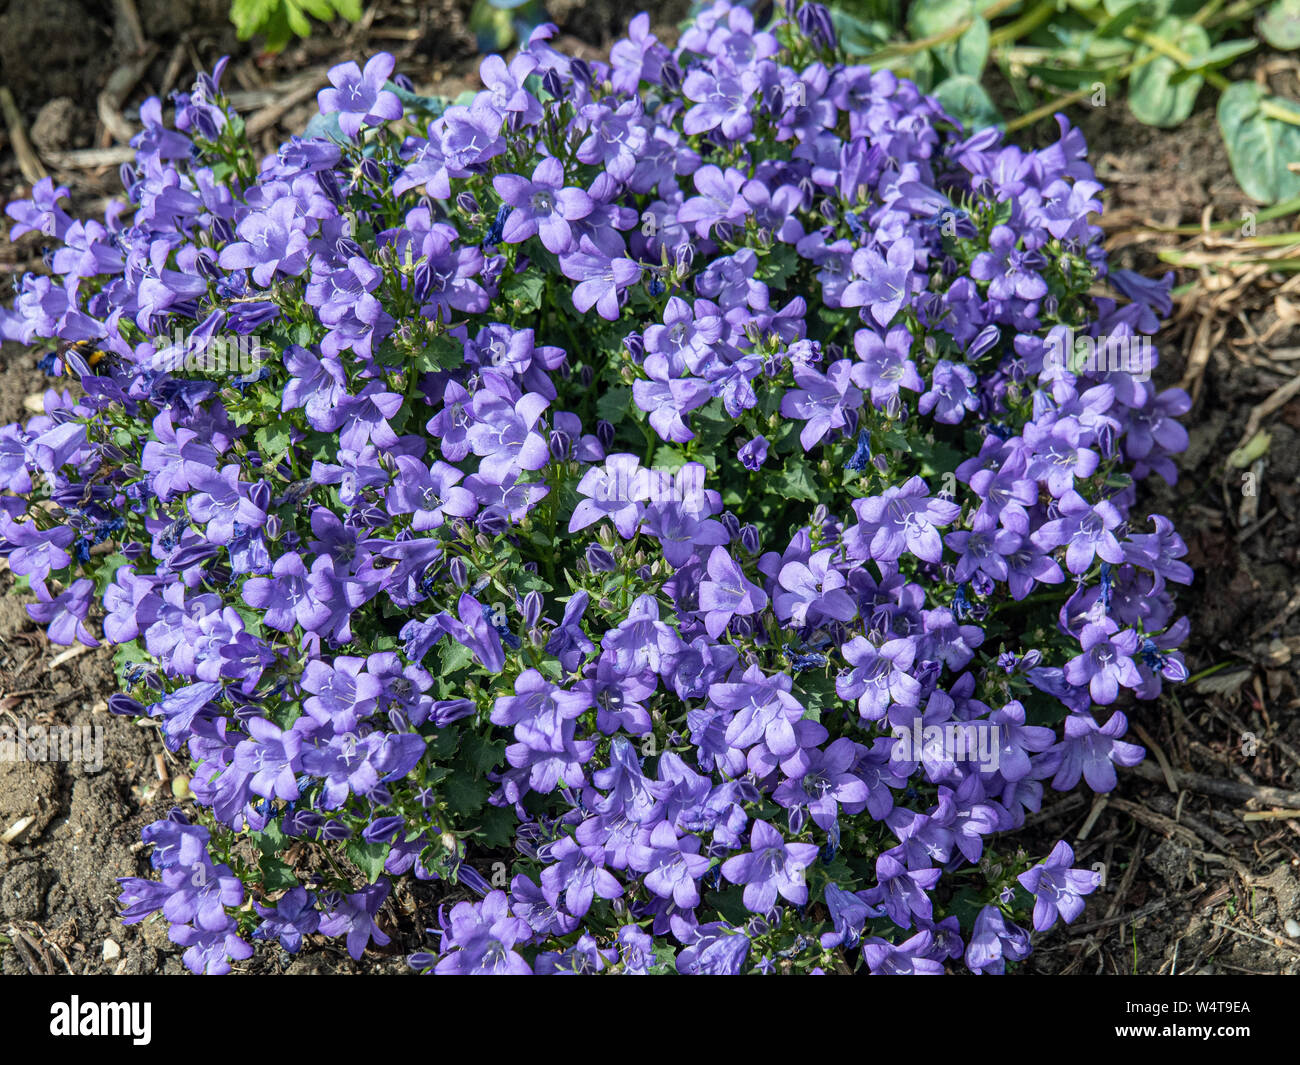 A clump of Campanula Sago in full flower showing the light blue bell shaped flowers Stock Photo